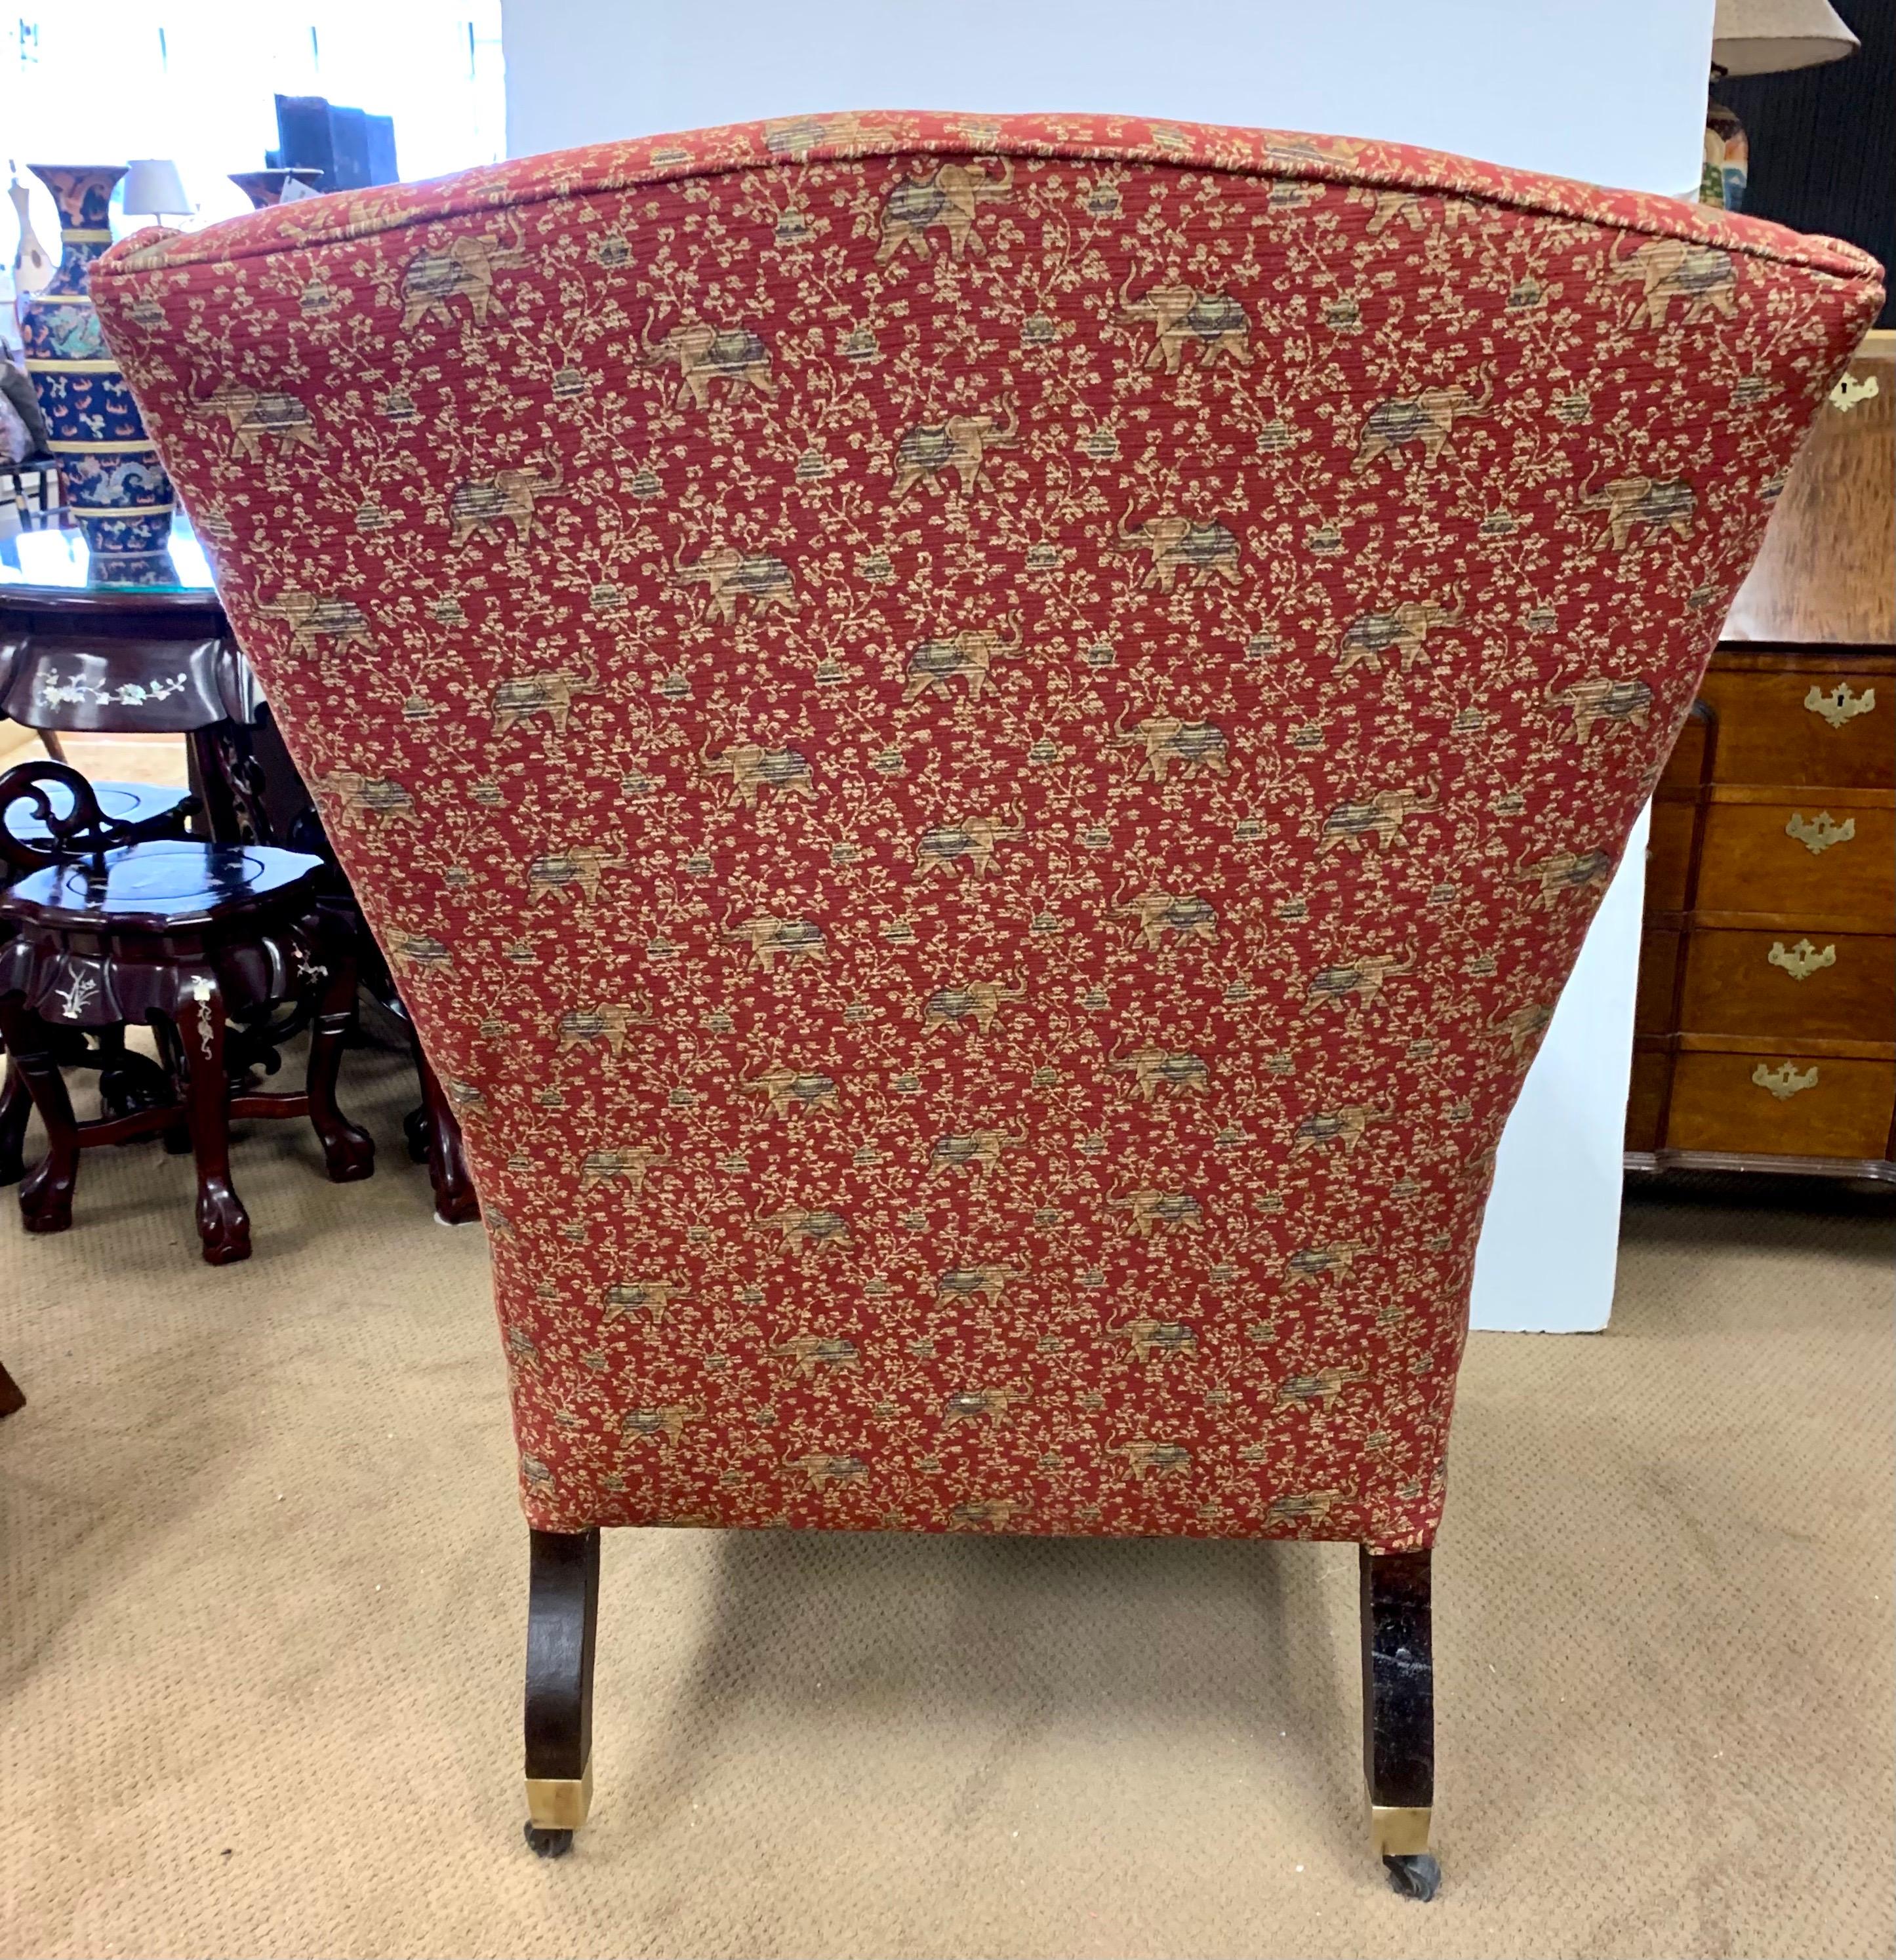 20th Century Modern Wingback Chair with Red Chinoiserie Print Upholstery